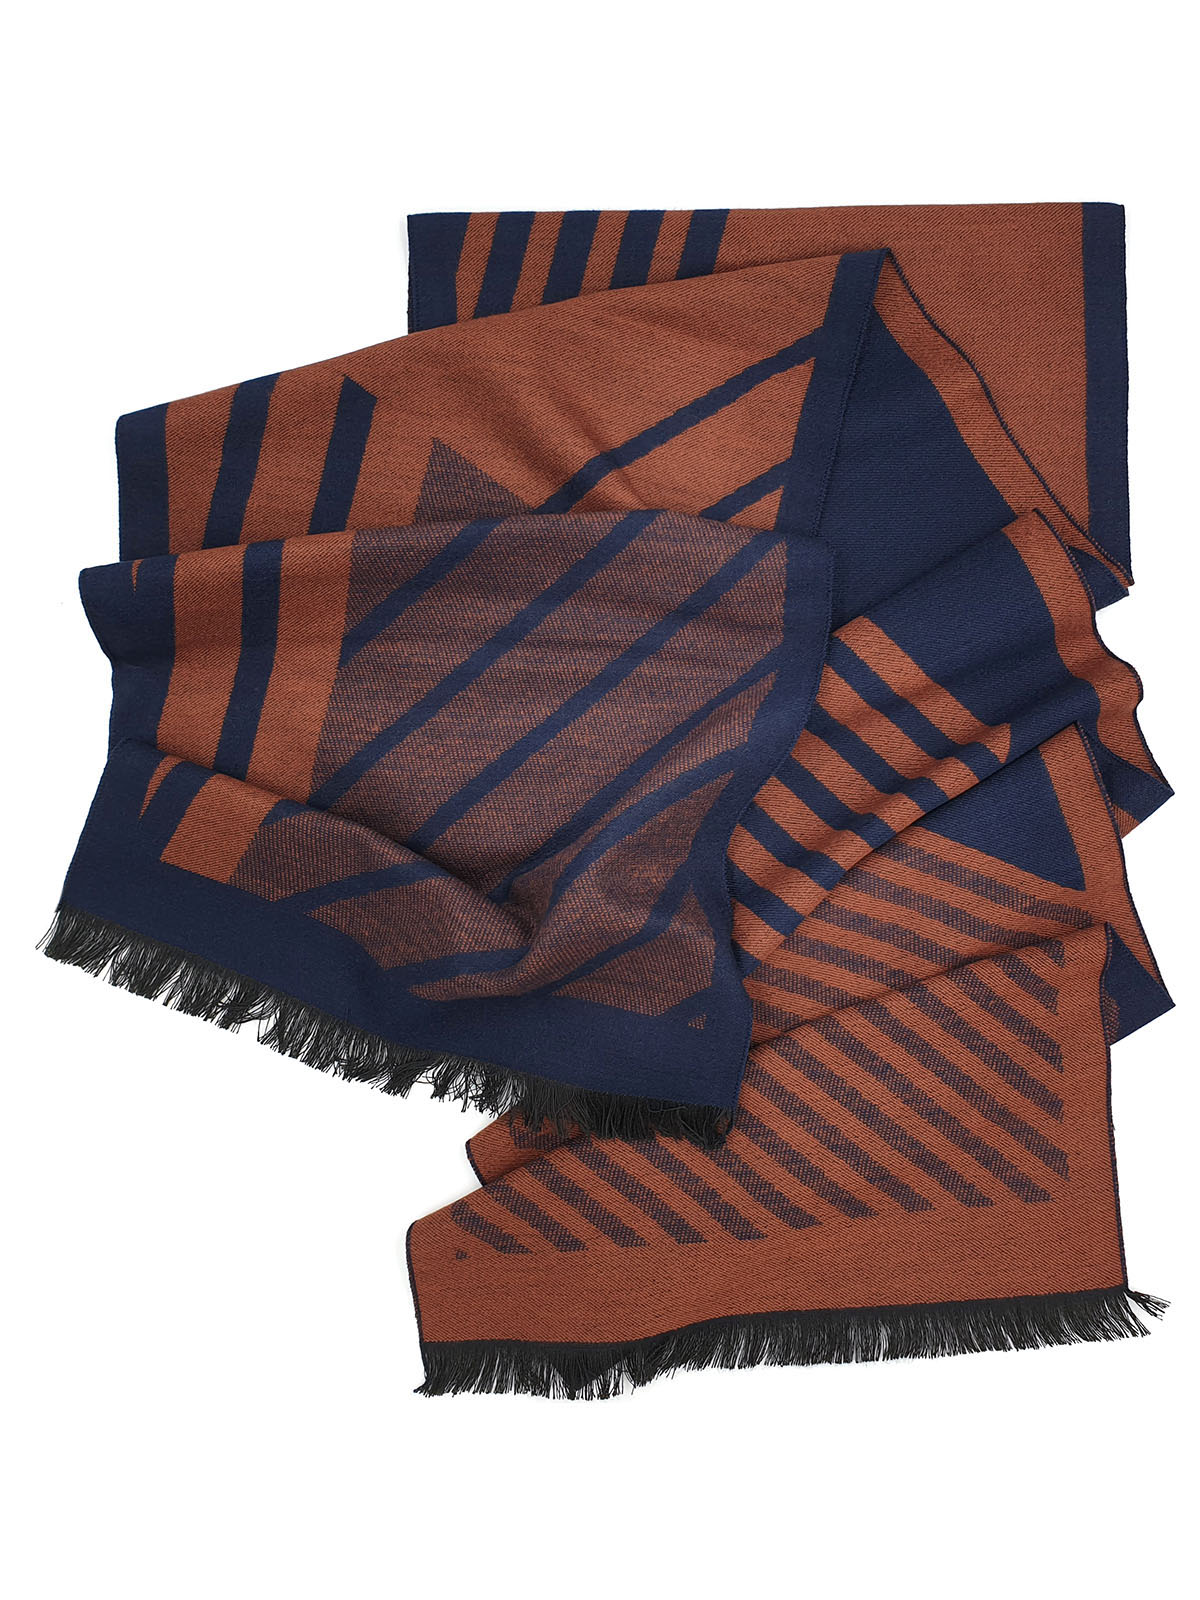 Scarf in tile and blue with fringe - 10355 - € 19.68 img2